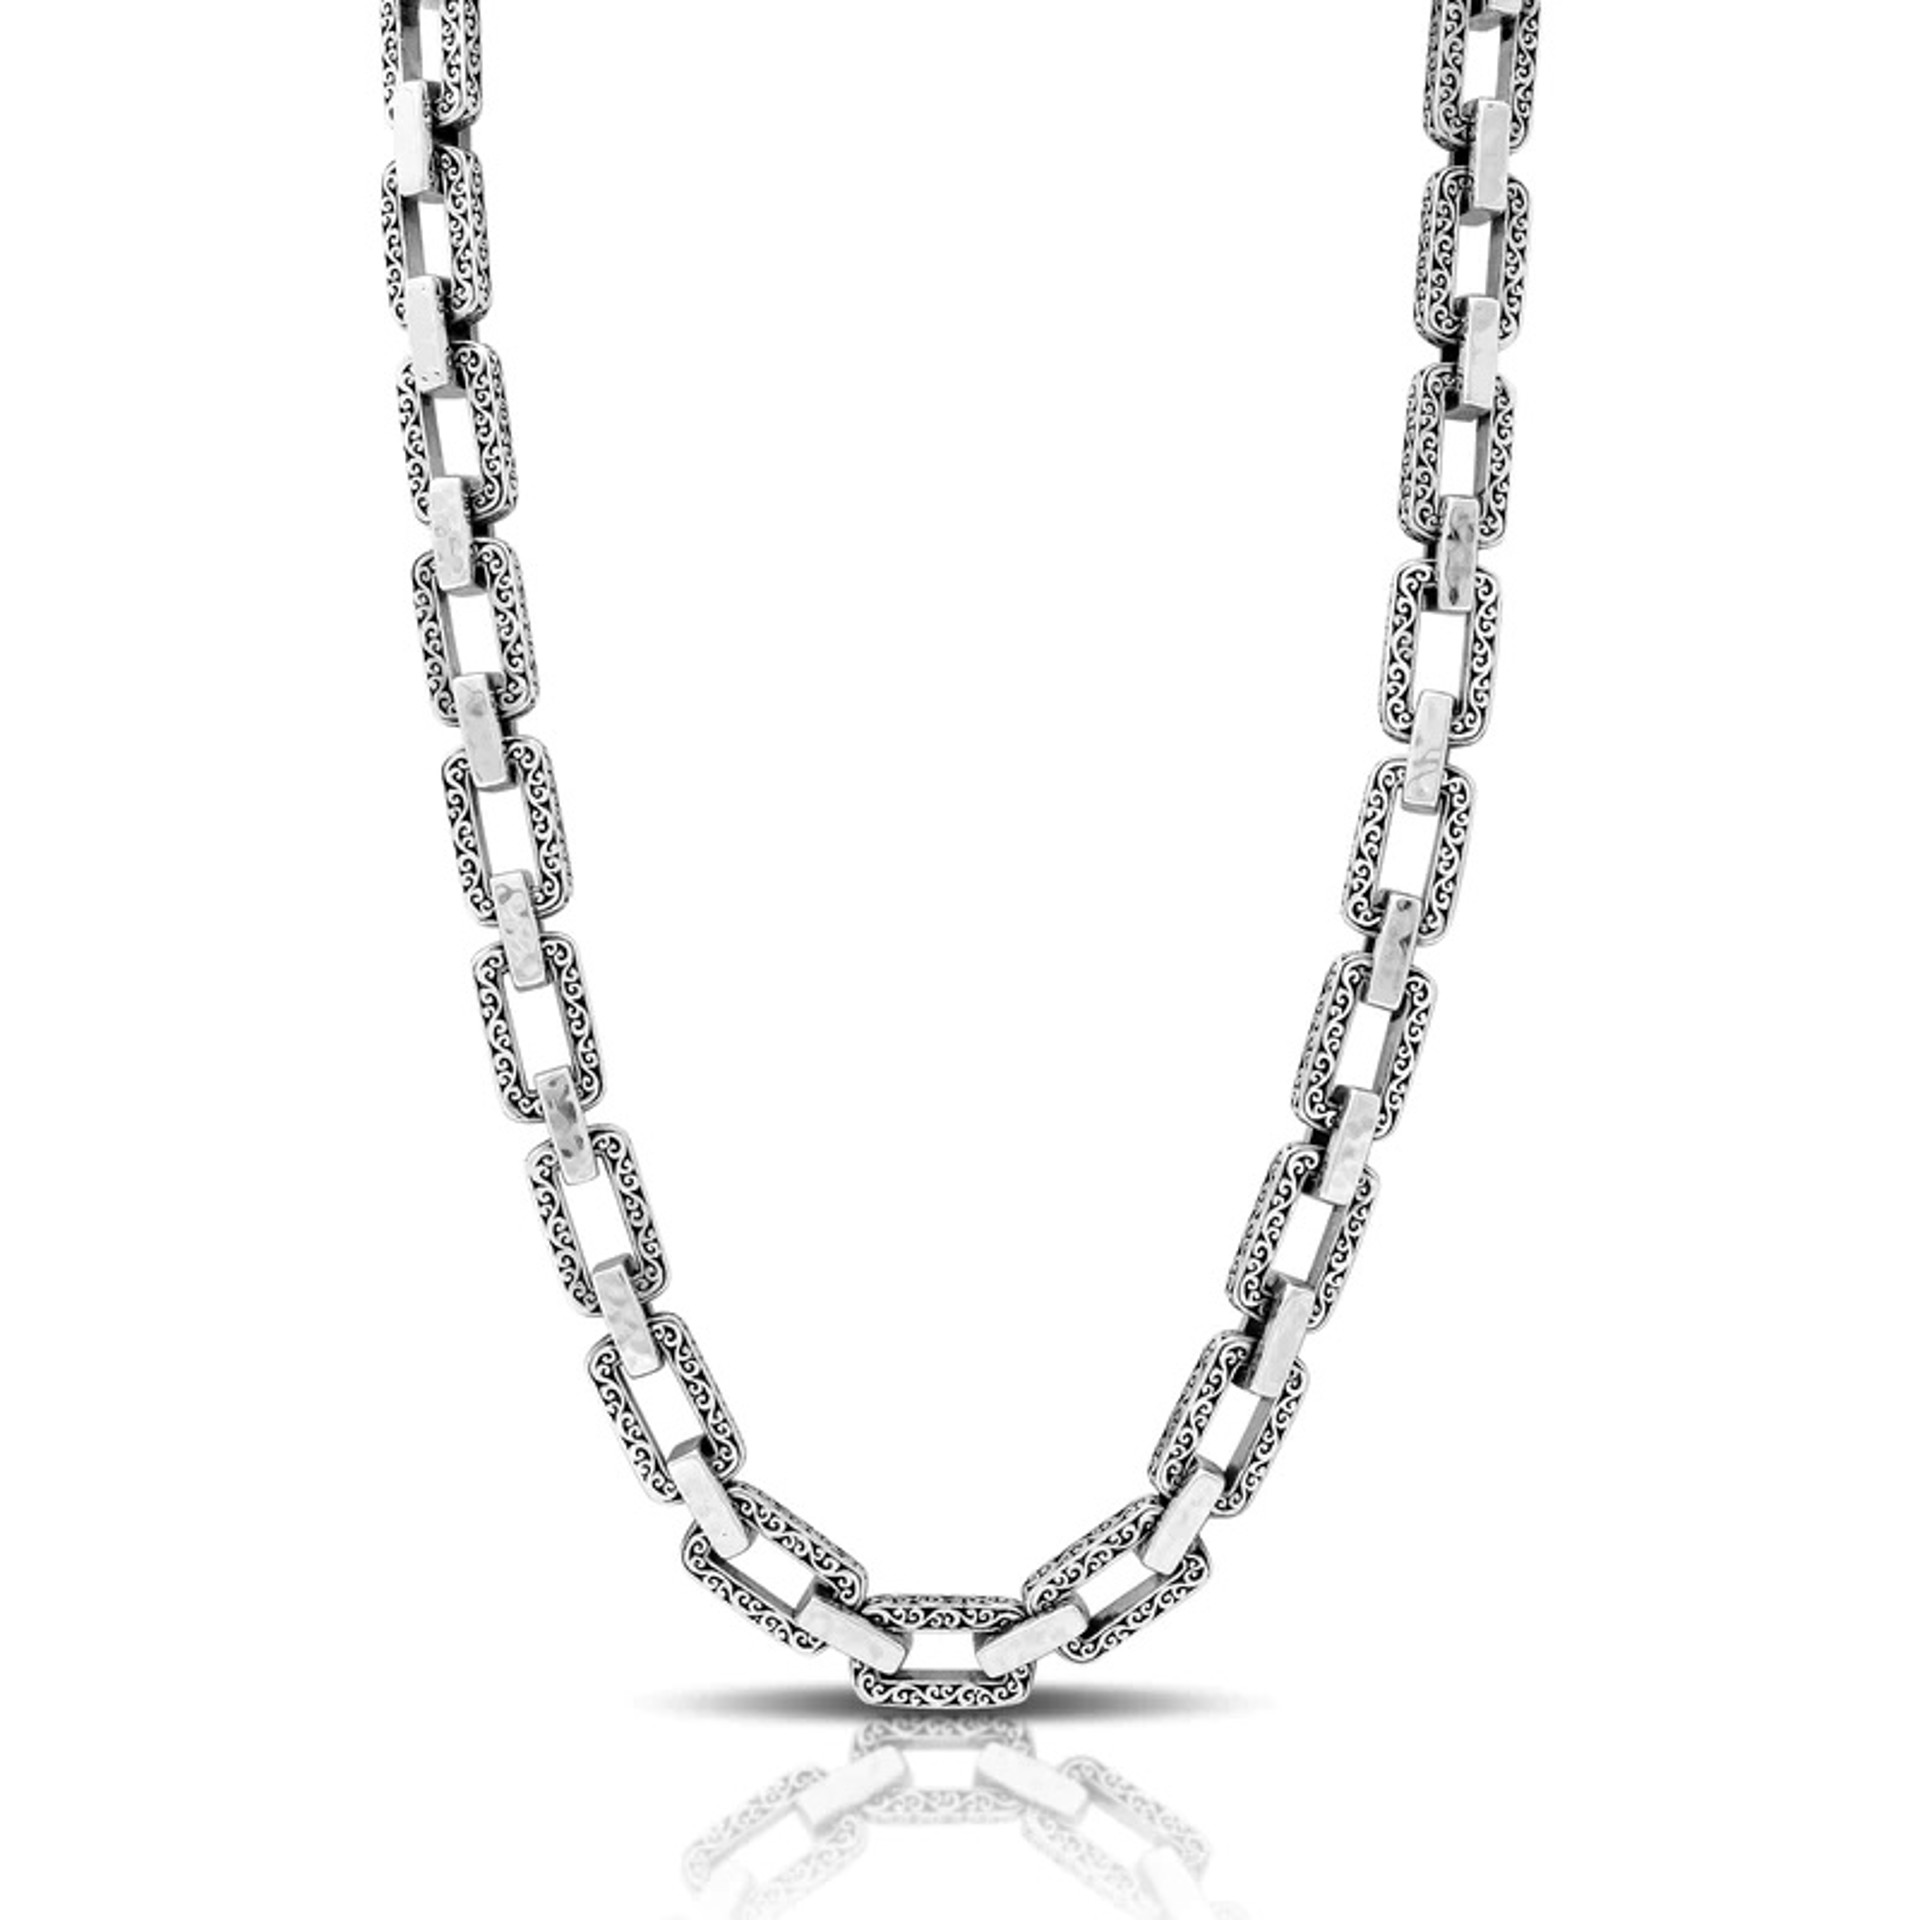 LH Scroll Rectangular Full Link 18"-21" Necklace by Lois Hill